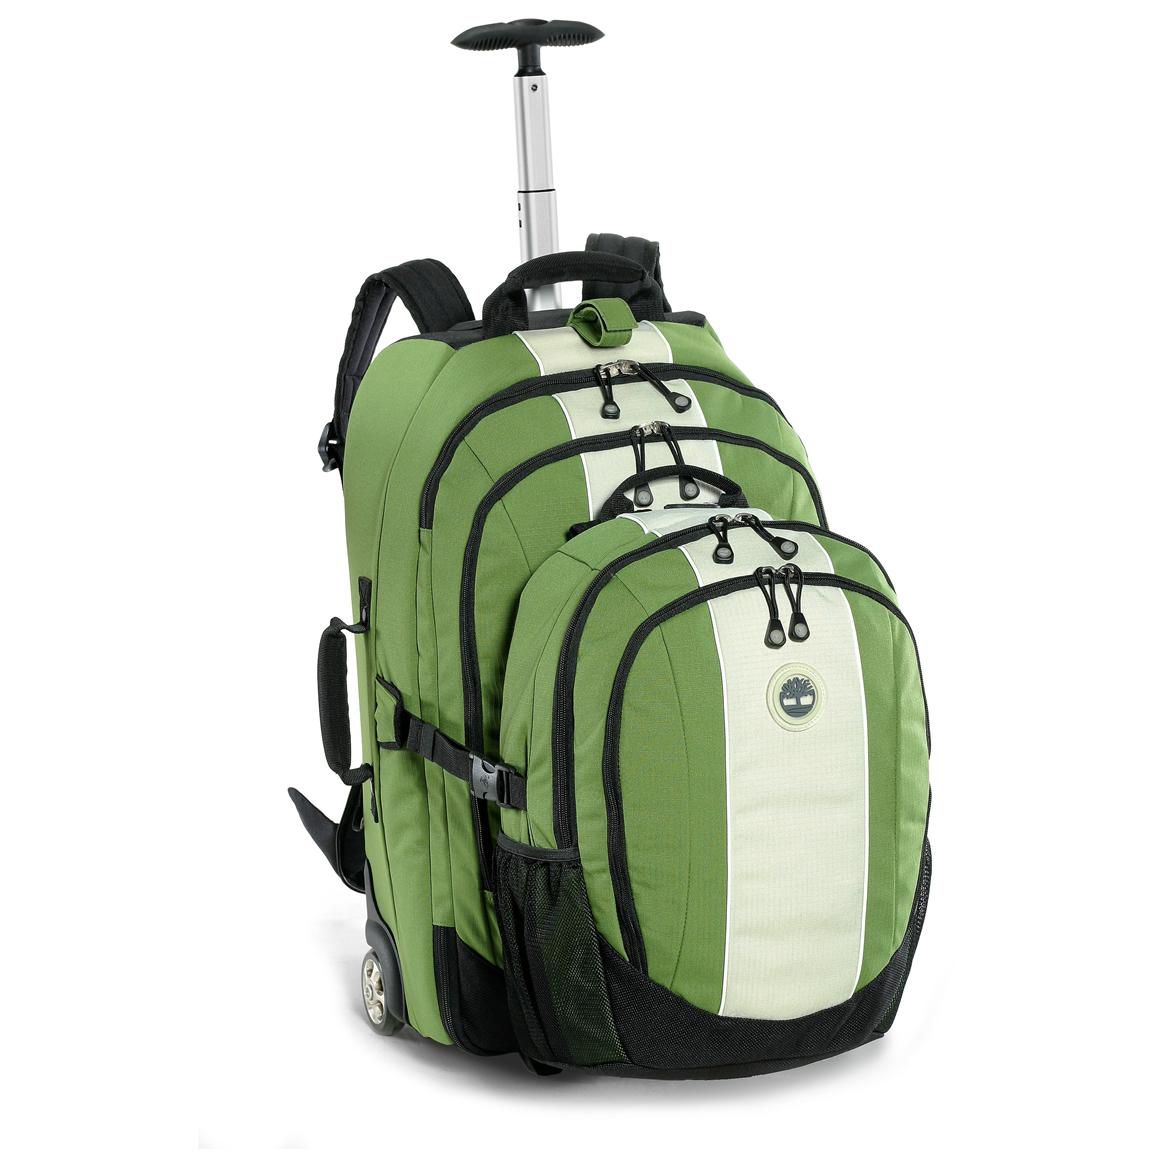 New Anello Backpack Deals In Australia | IUCN Water